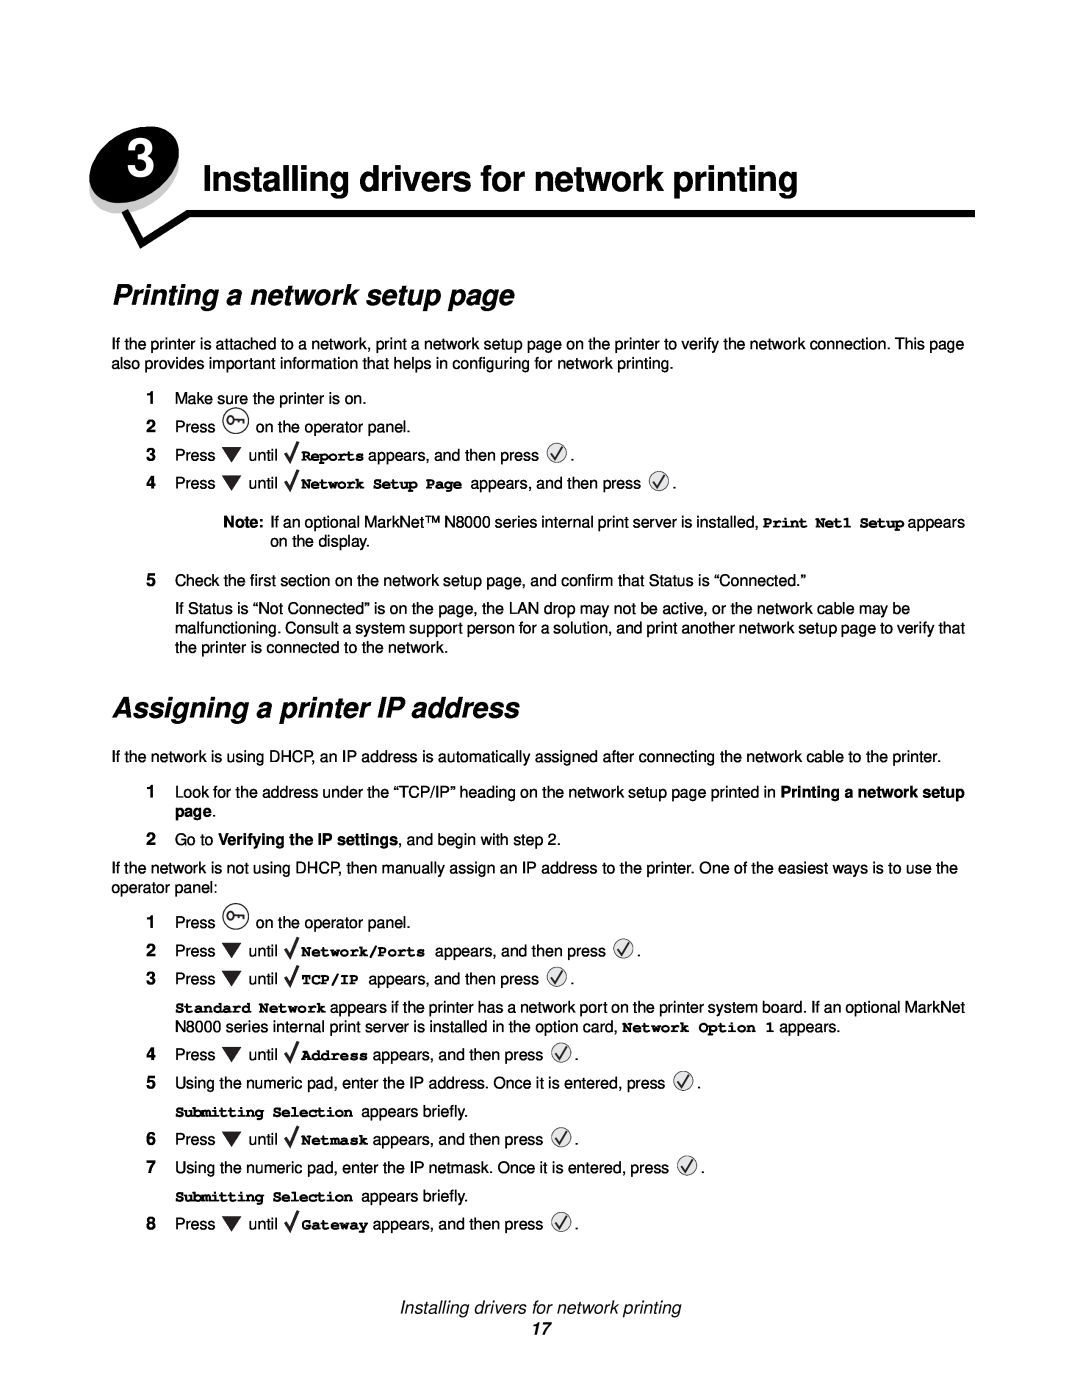 Lexmark 920 manual Installing drivers for network printing, Printing a network setup page, Assigning a printer IP address 